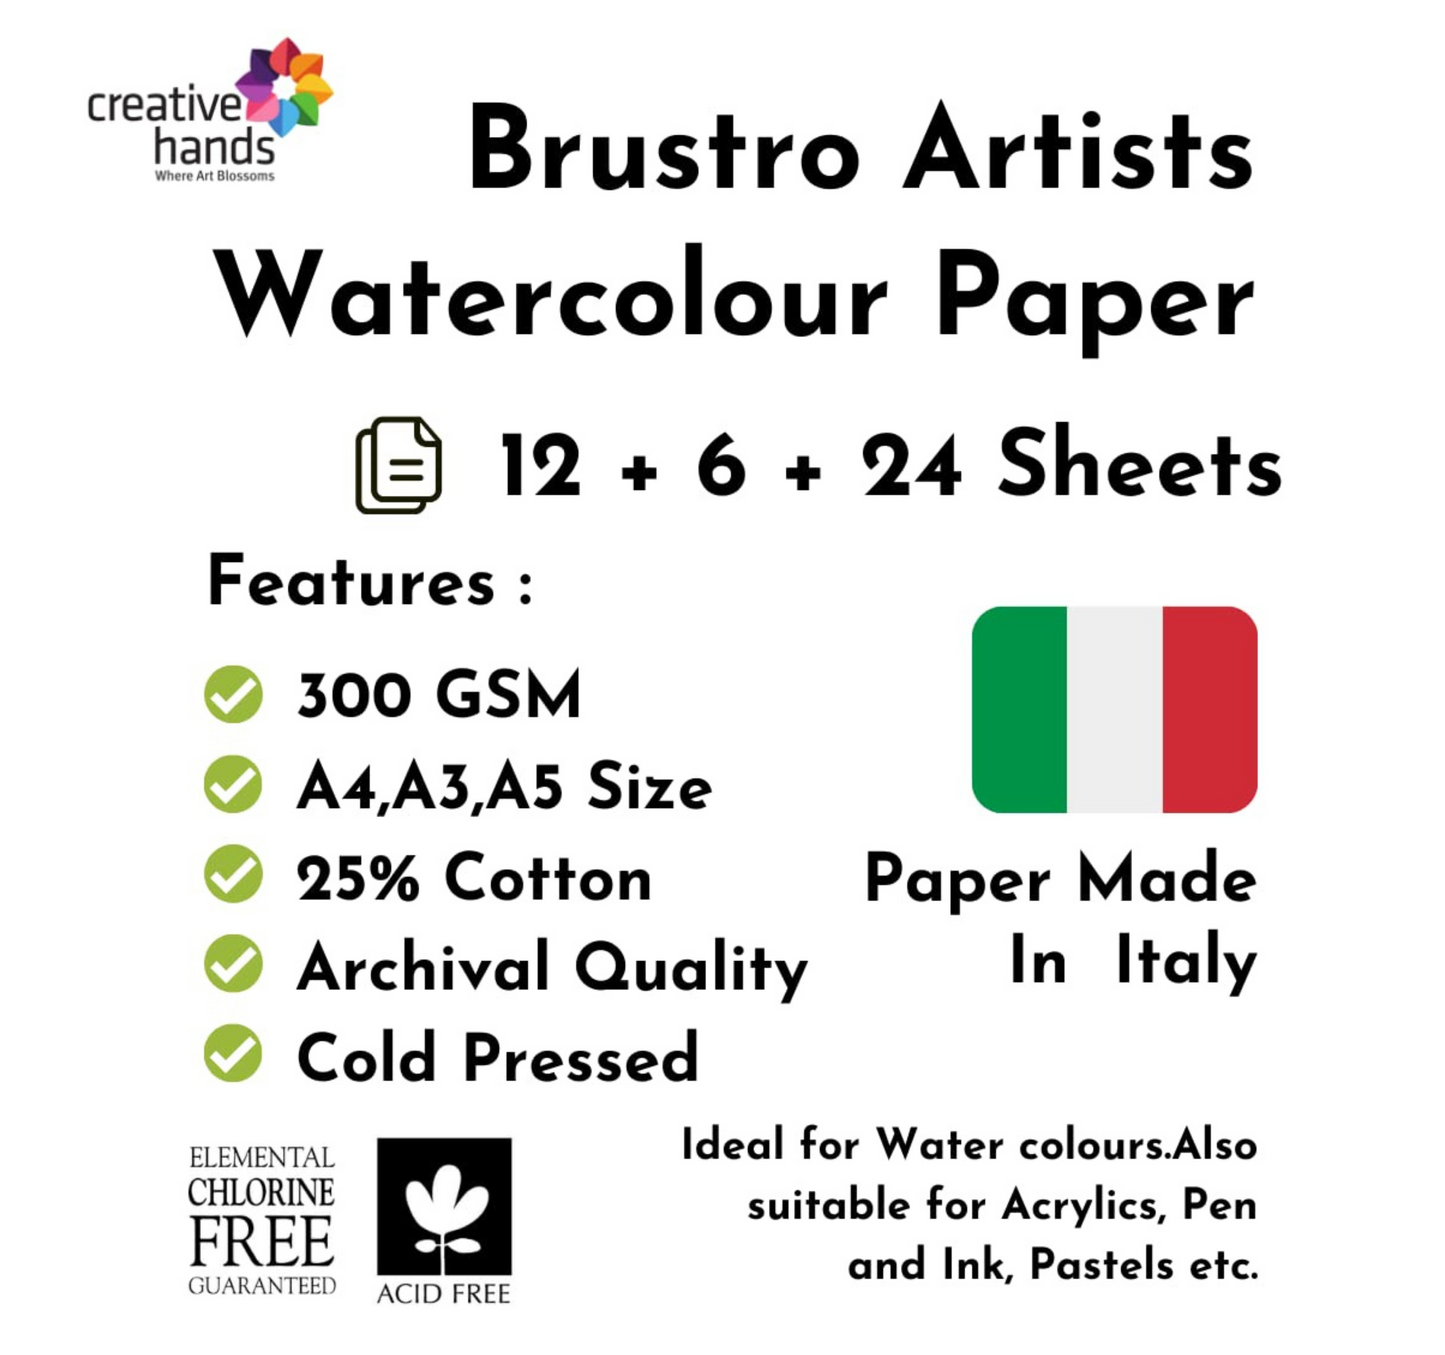 Brustro Artists Watercolour Paper 300 GSM, 25% Cotton, Cold Pressed, A4 (Pack of 12), A3 (Pack of 6) & A5 (Pack of 24)